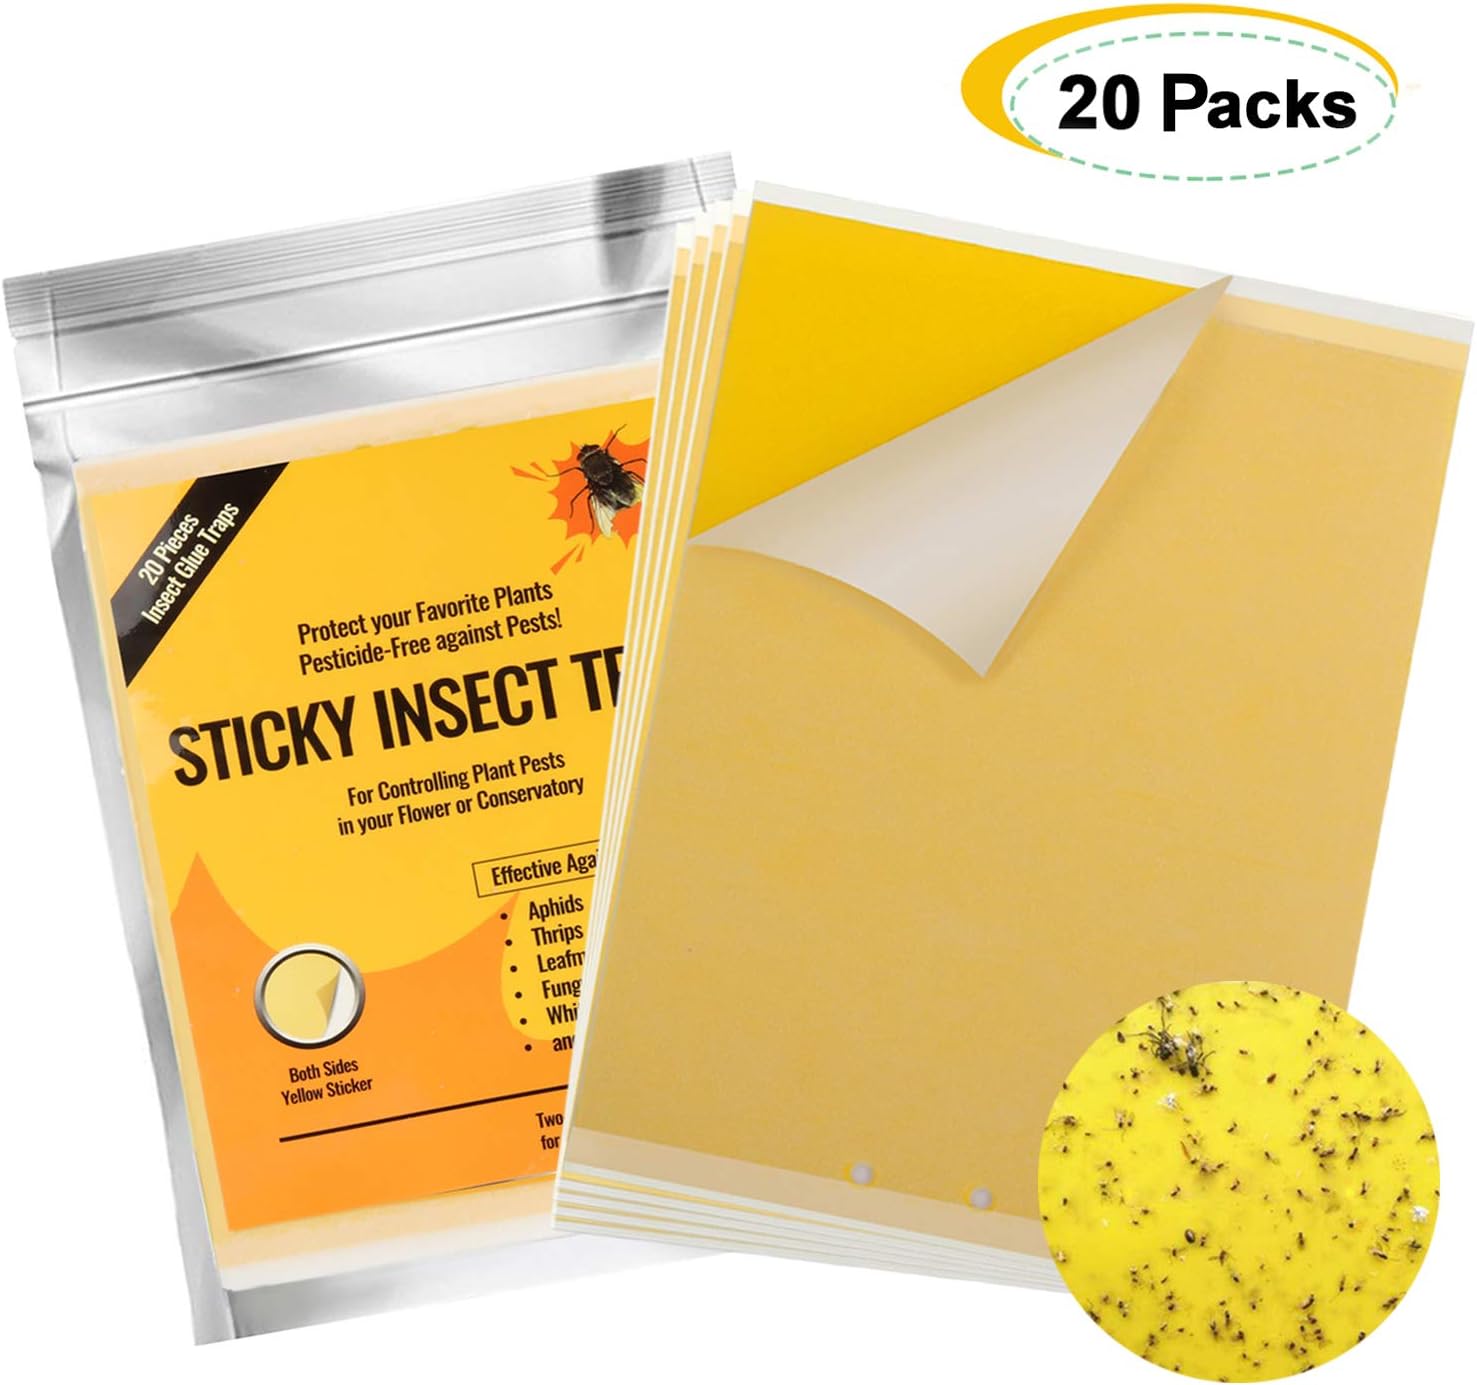 Karvipark 20 Packs Fly Trap, Dual Sided Yellow Sticky Traps, Plant Flycatchers for against Flying Plant Insect, Fungus Gnats, Whiteflies, Aphids, Leafminers